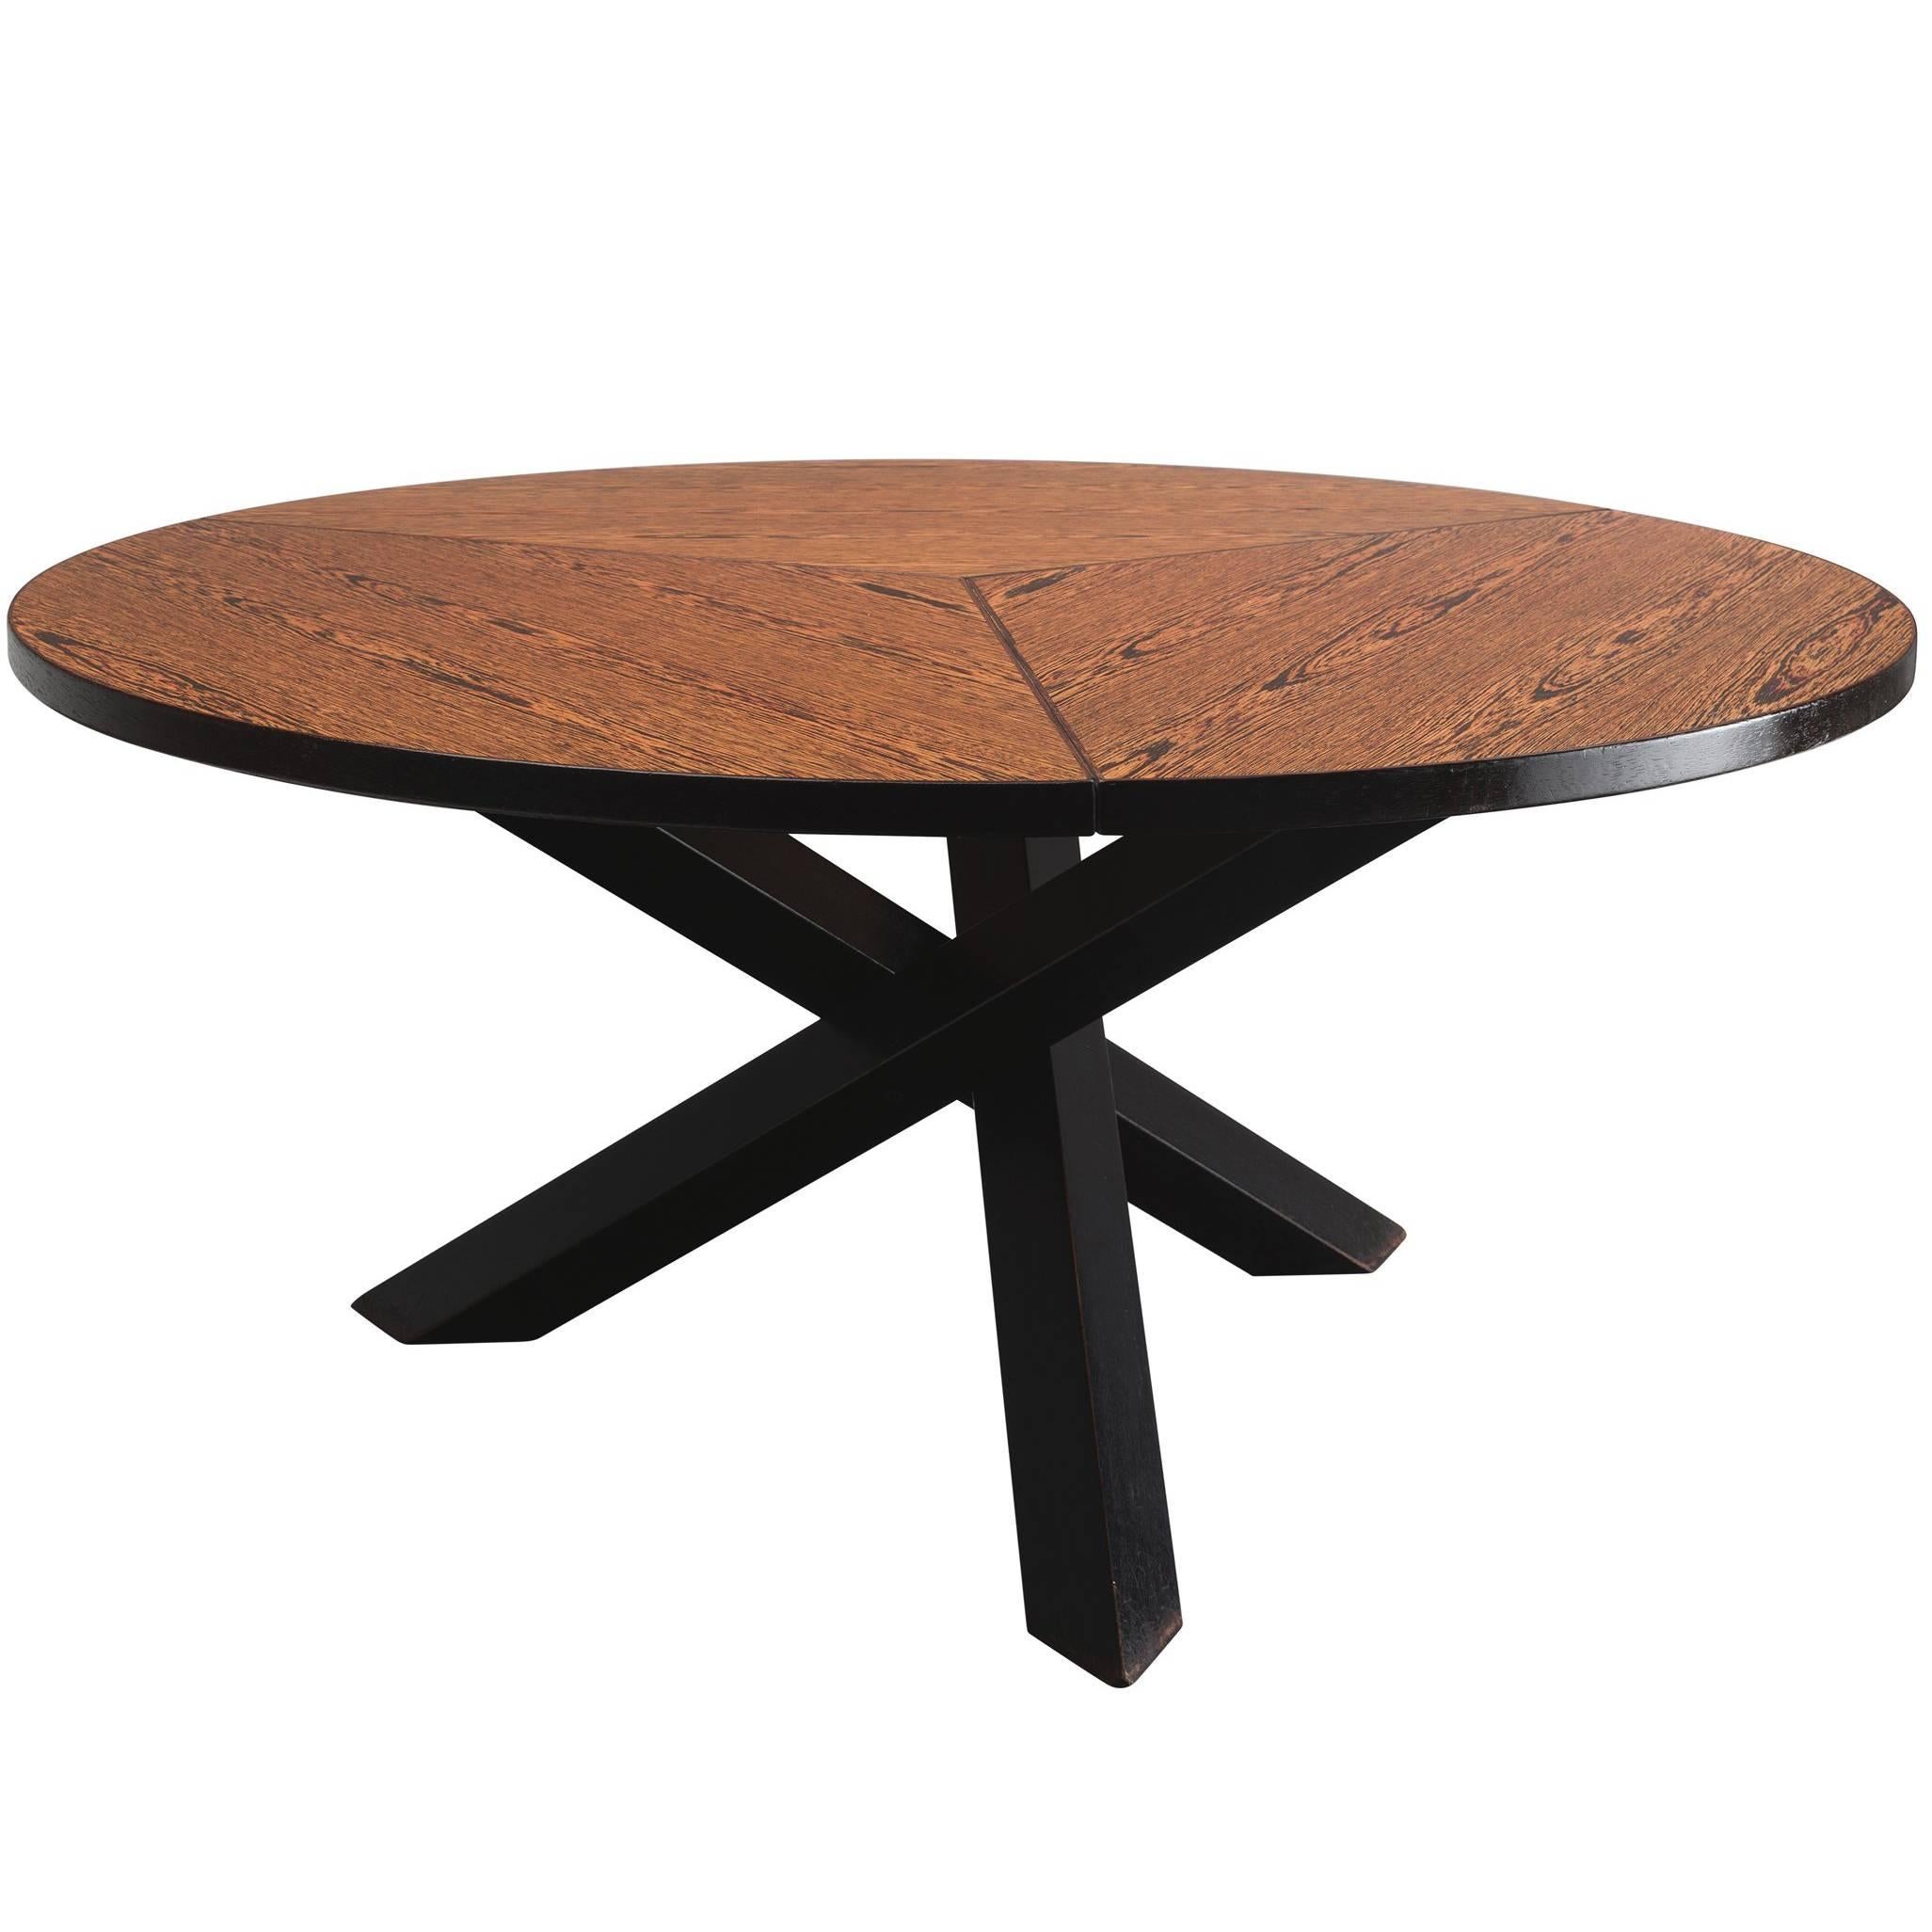 Dining table, in Wengé by Martin Visser for 't Spectrum, the Netherlands, 1960s. 

Beautiful patinated dining table with round top, divided into three parts. The base consist of three crossed legs of solid, dark stained wood. The veneer top shows